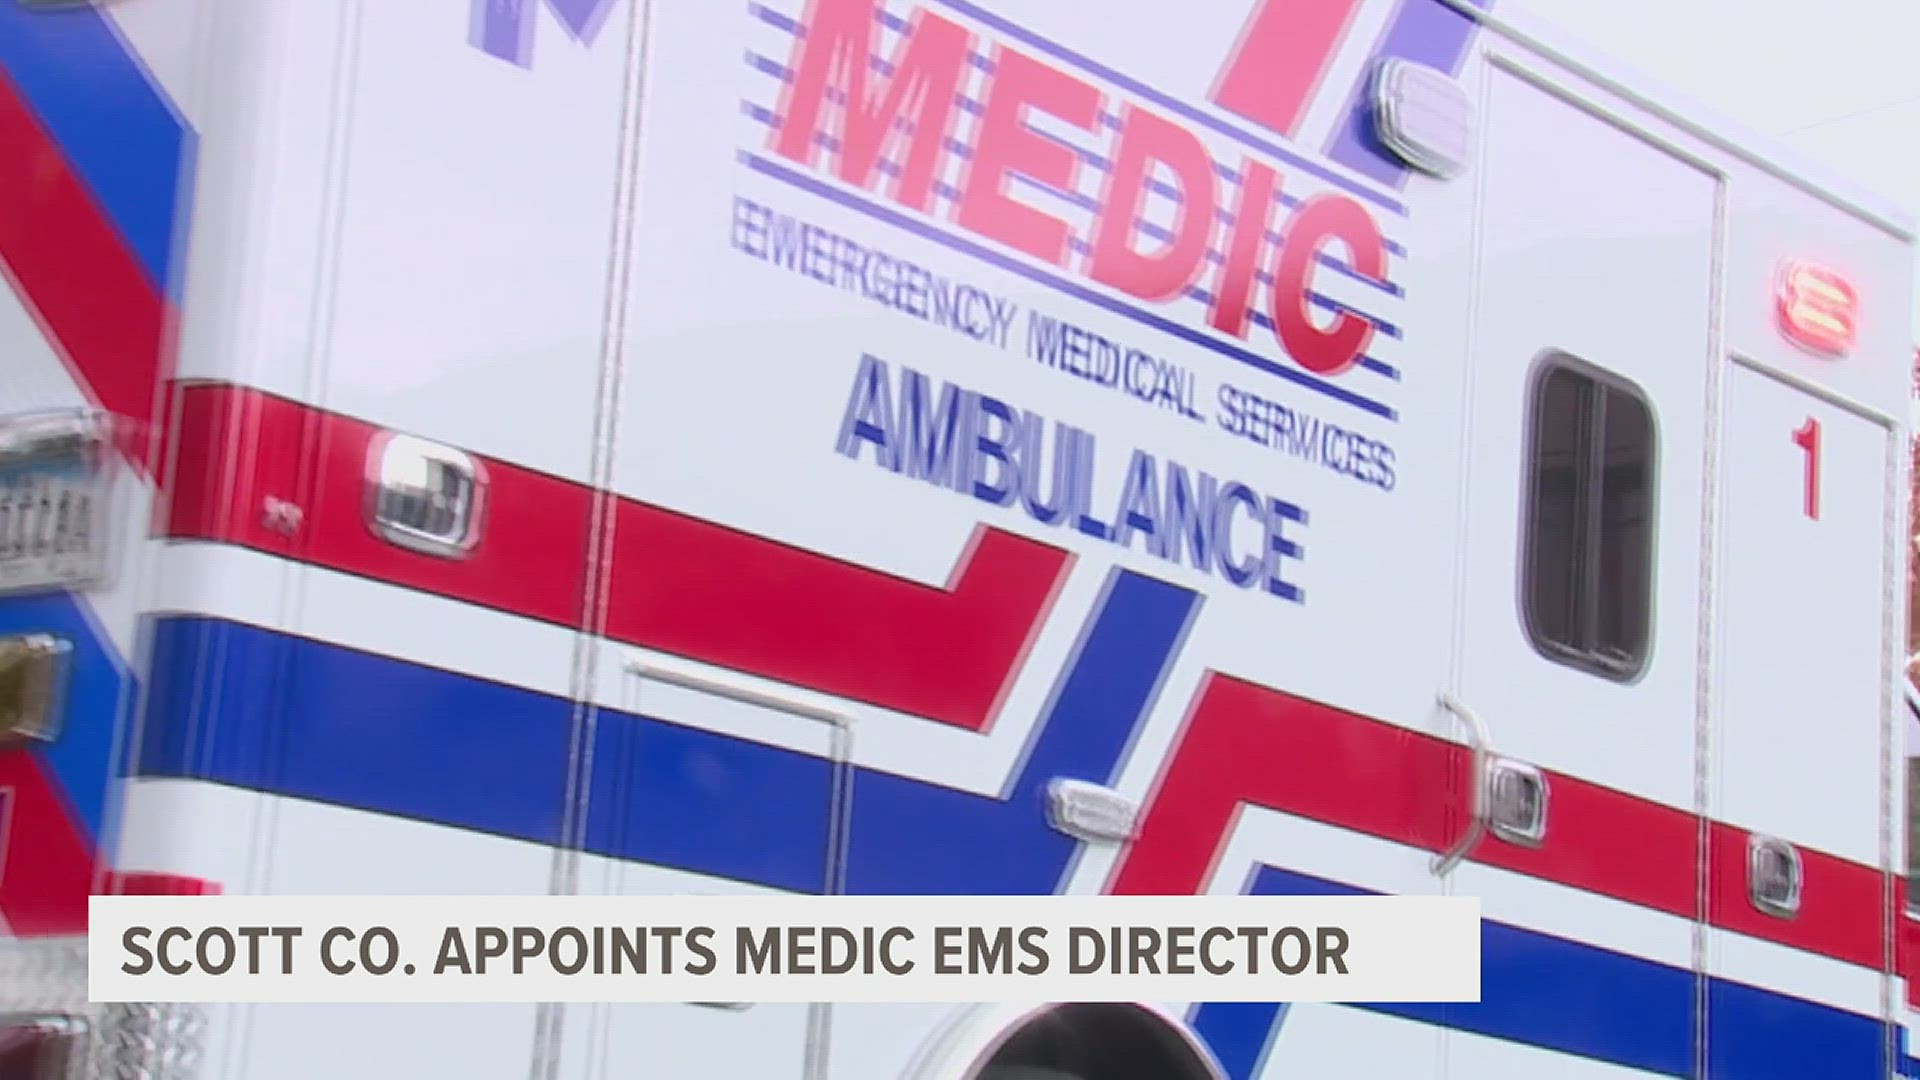 After a national search Scott County has found their director for the new ambulance department. Current Medic EMS manager Paul Andorf will assume the role next year.